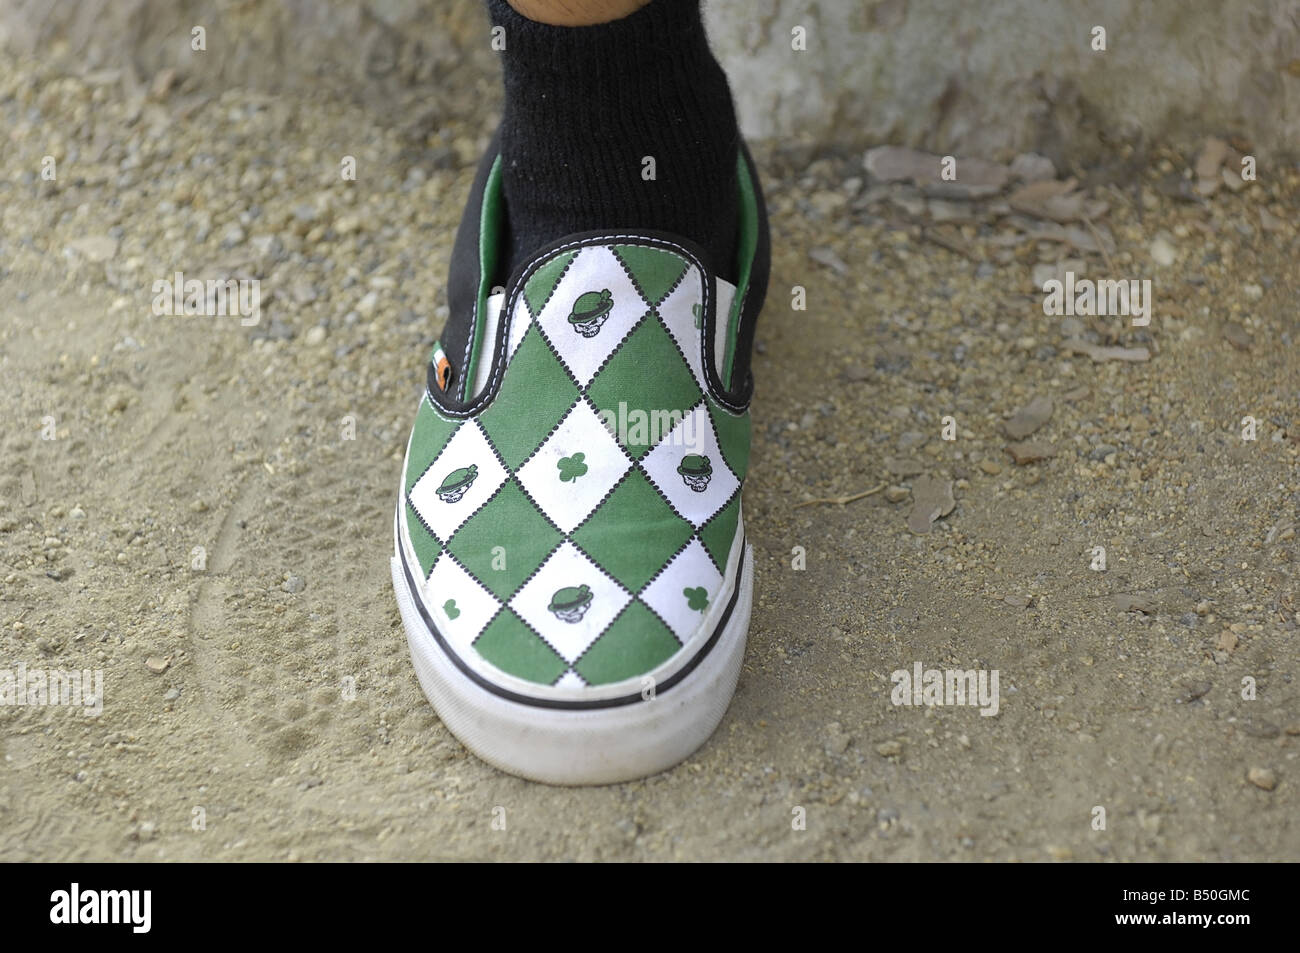 Green Vans style shoe with shamrock and skull figures Stock Photo - Alamy